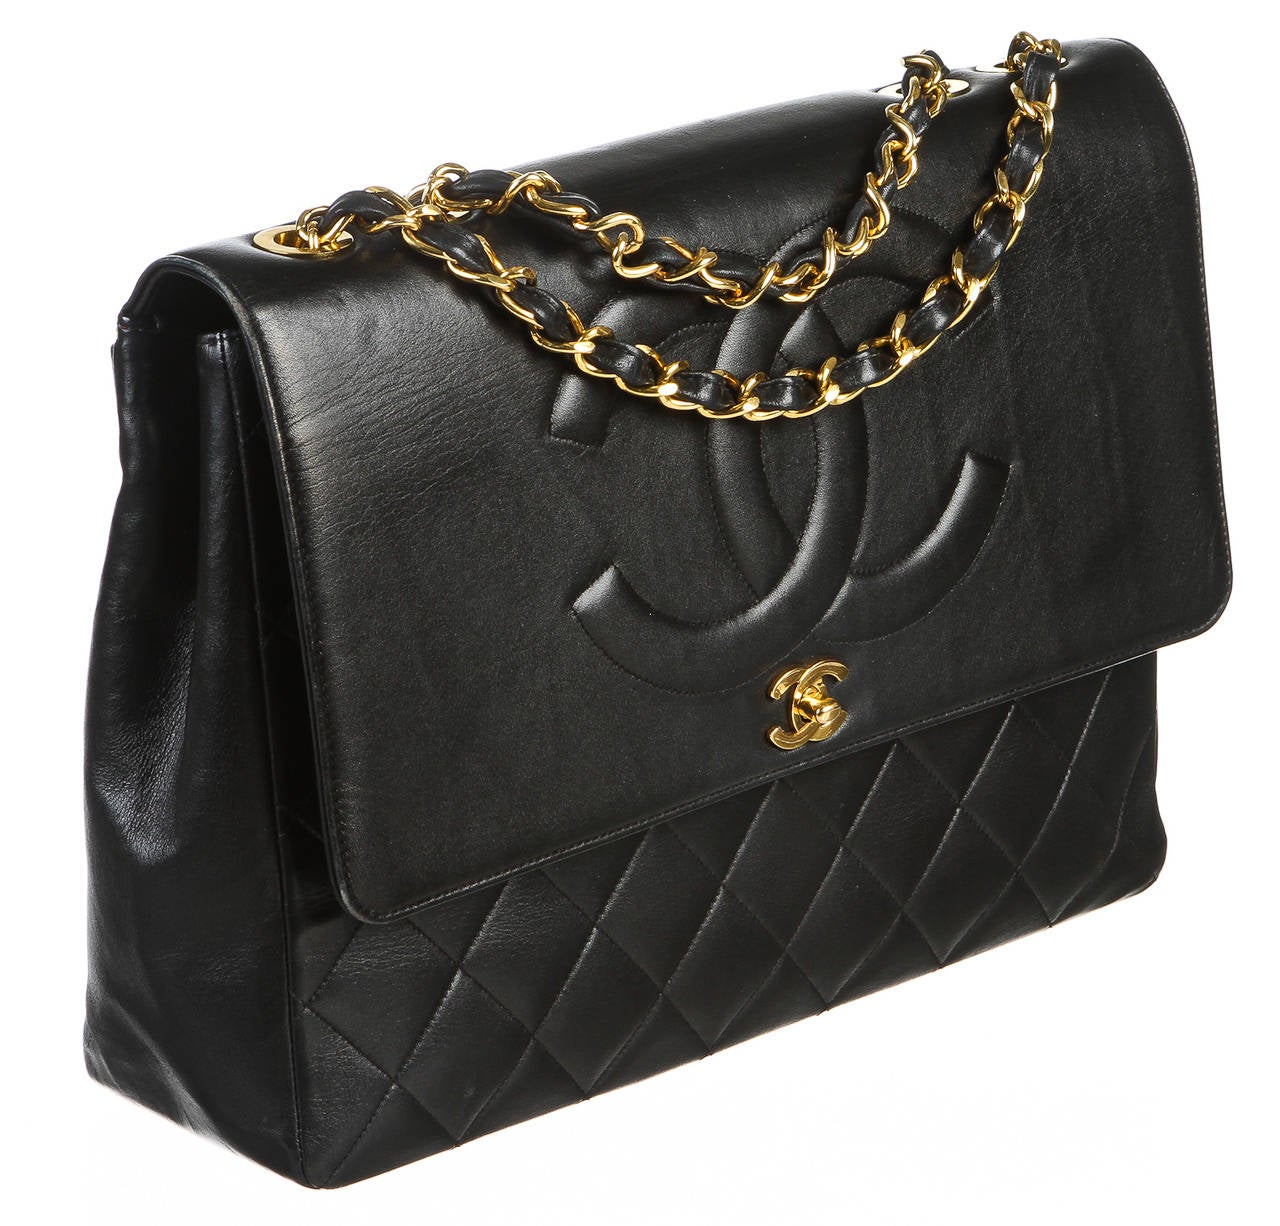 Step out in style with this absolutely amazing Chanel vintage handbag. This handbag has been crafted from black lambskin and features all of your favorite details that you would find in a classic handbag. The larger prominent turn lock is one of our